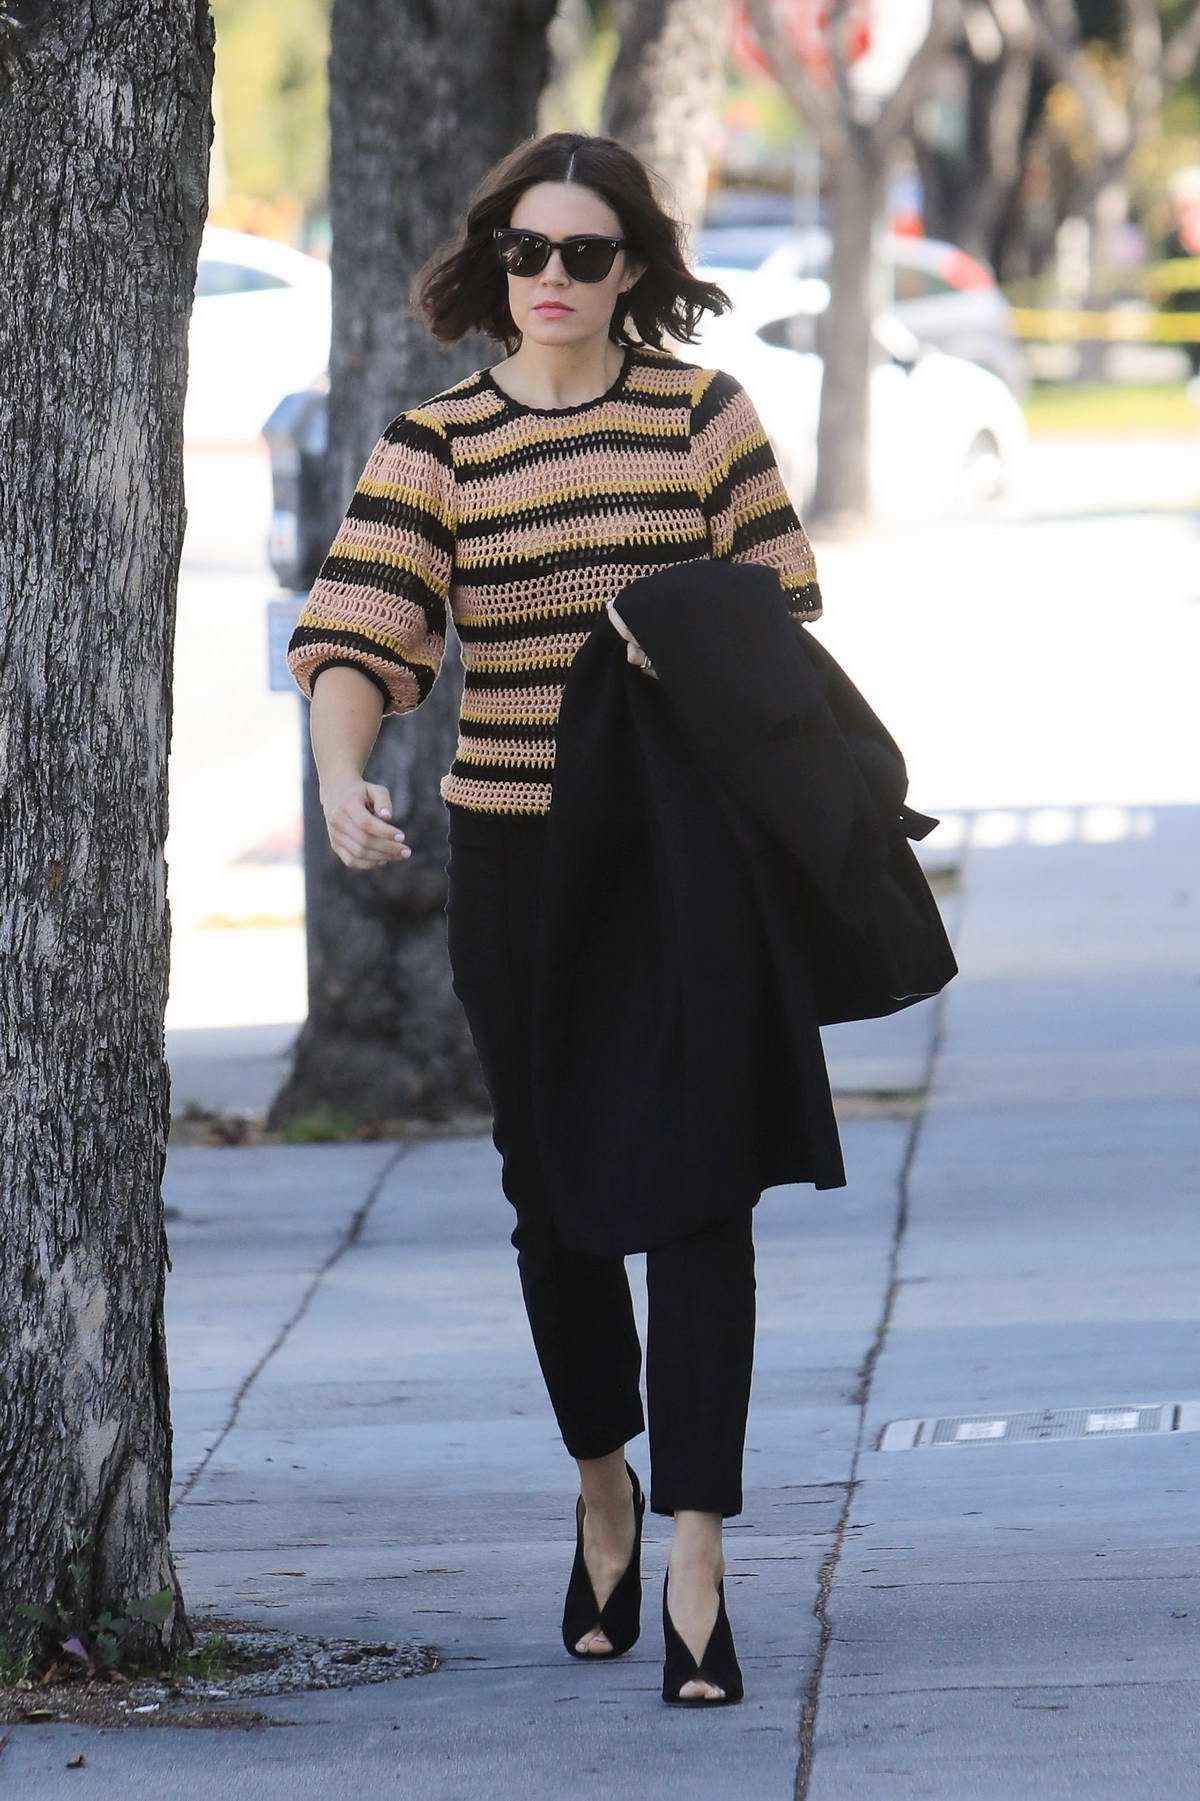 mandy moore steps out in a striped knitted sweater and black trousers ...